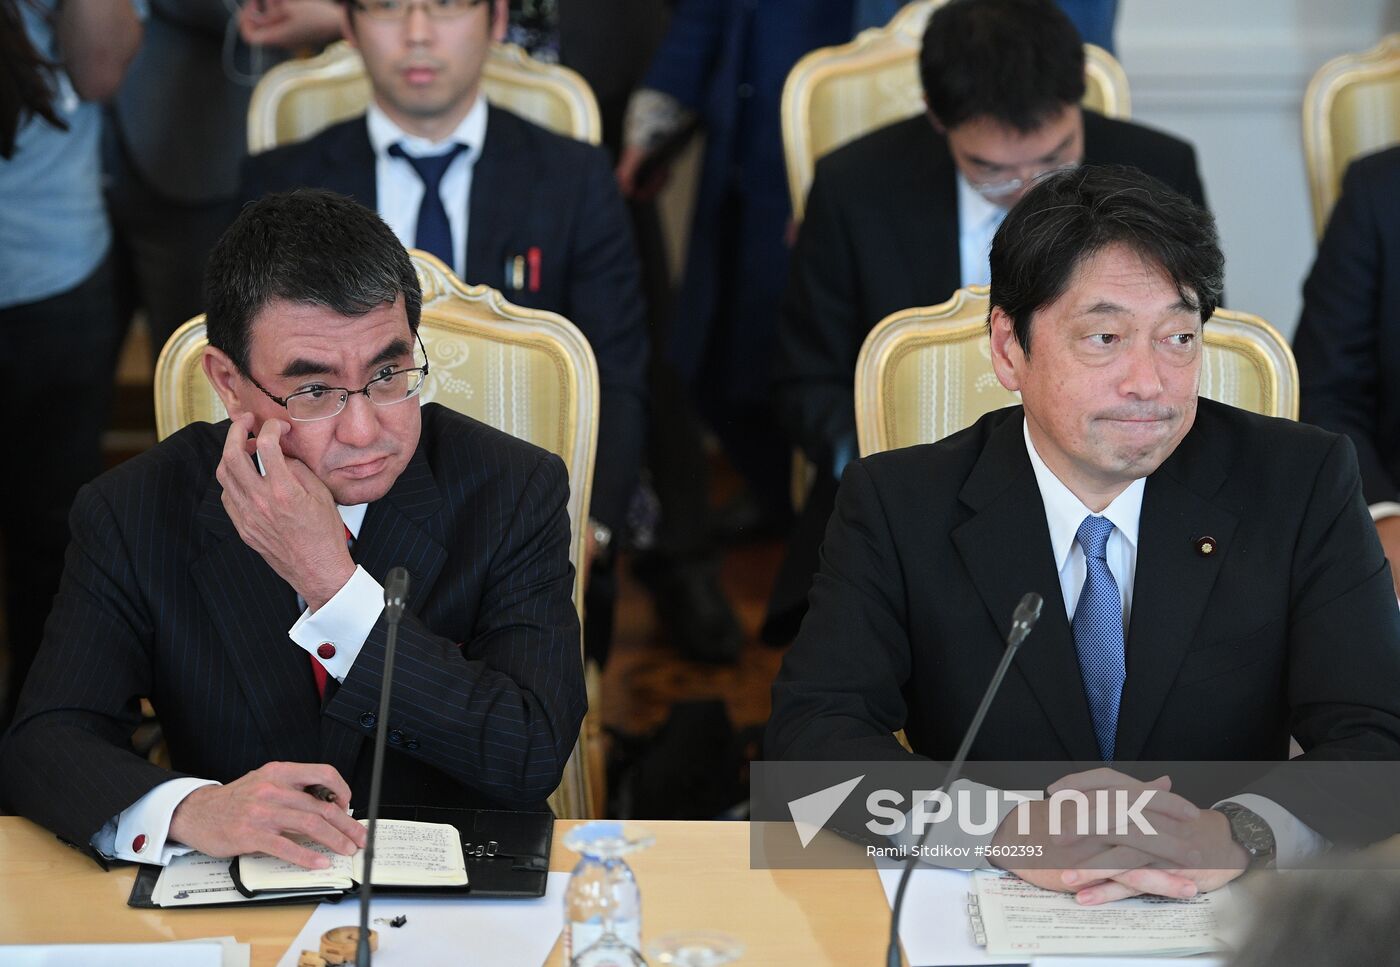 Meeting of ministers of foreign affairs and defense of Russia and Japan